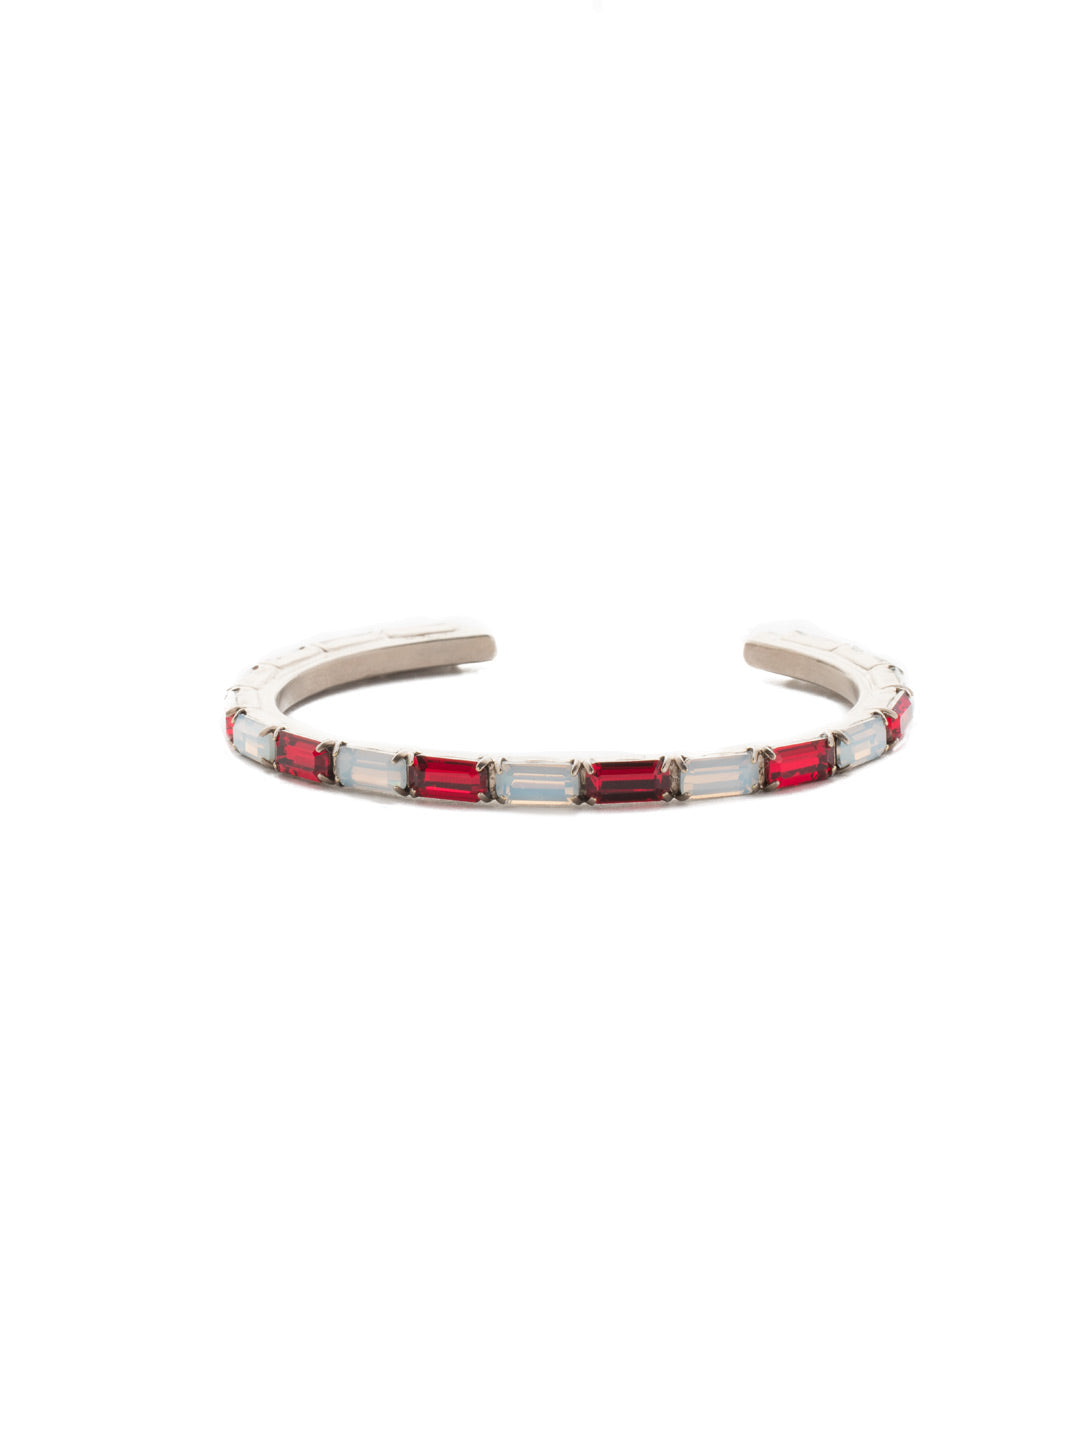 Brilliant Baguette Cuff Bracelet - BDK49ASCP - This cuff bracelet features repeating crystal baguettes and can be mixed and matched in a myriad of ways. From Sorrelli's Crimson Pride collection in our Antique Silver-tone finish.